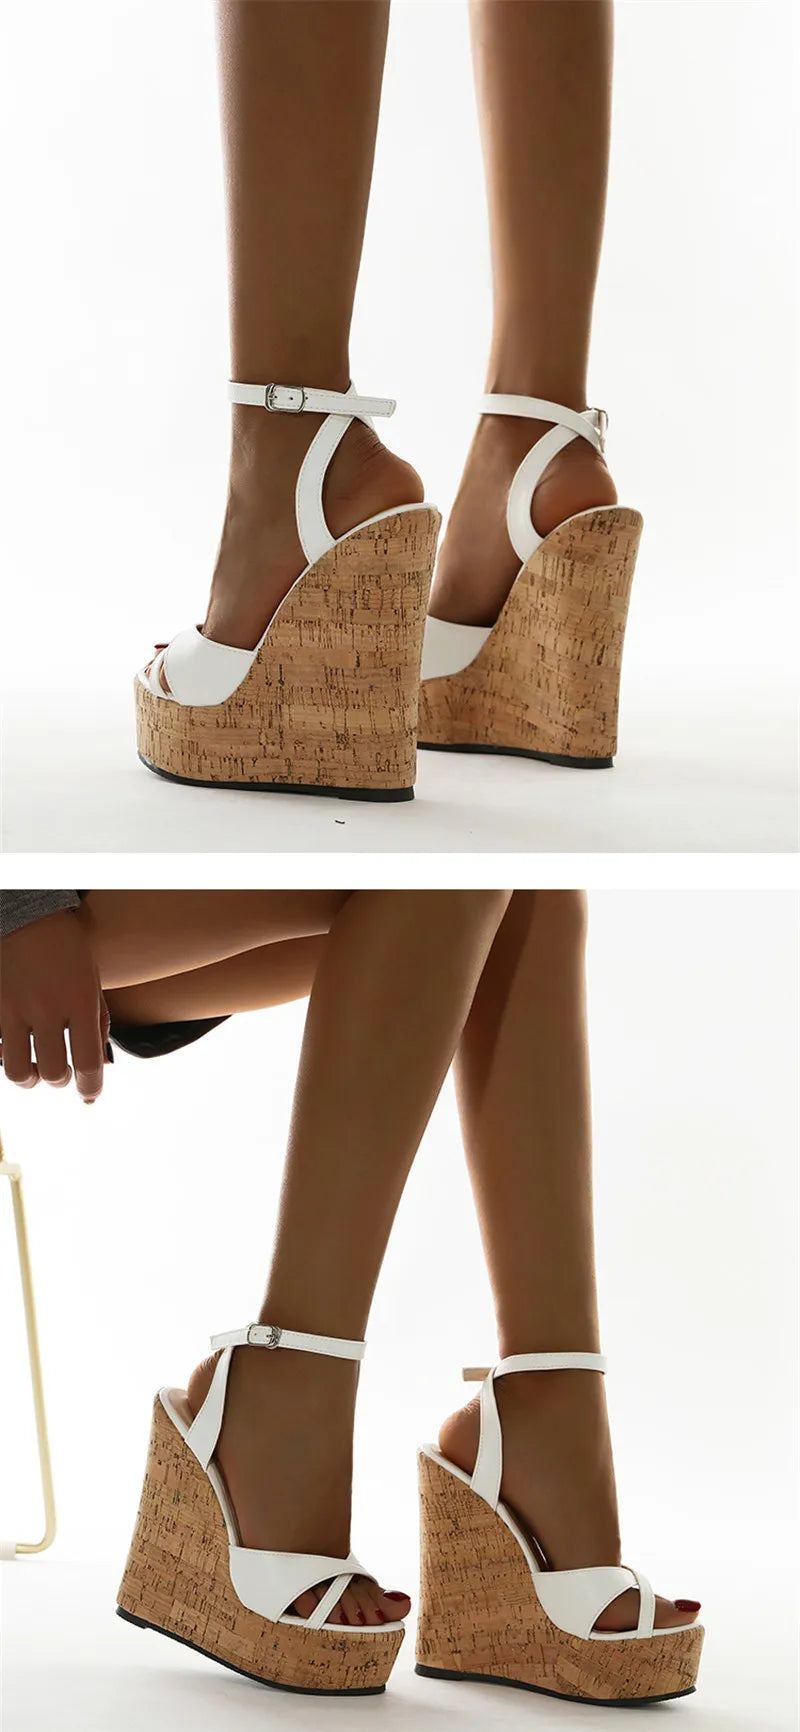 Summer White Women's High Heels Hollow Out Sandals Platform Buckle Wedges Front Open Toe Ladies Shoes